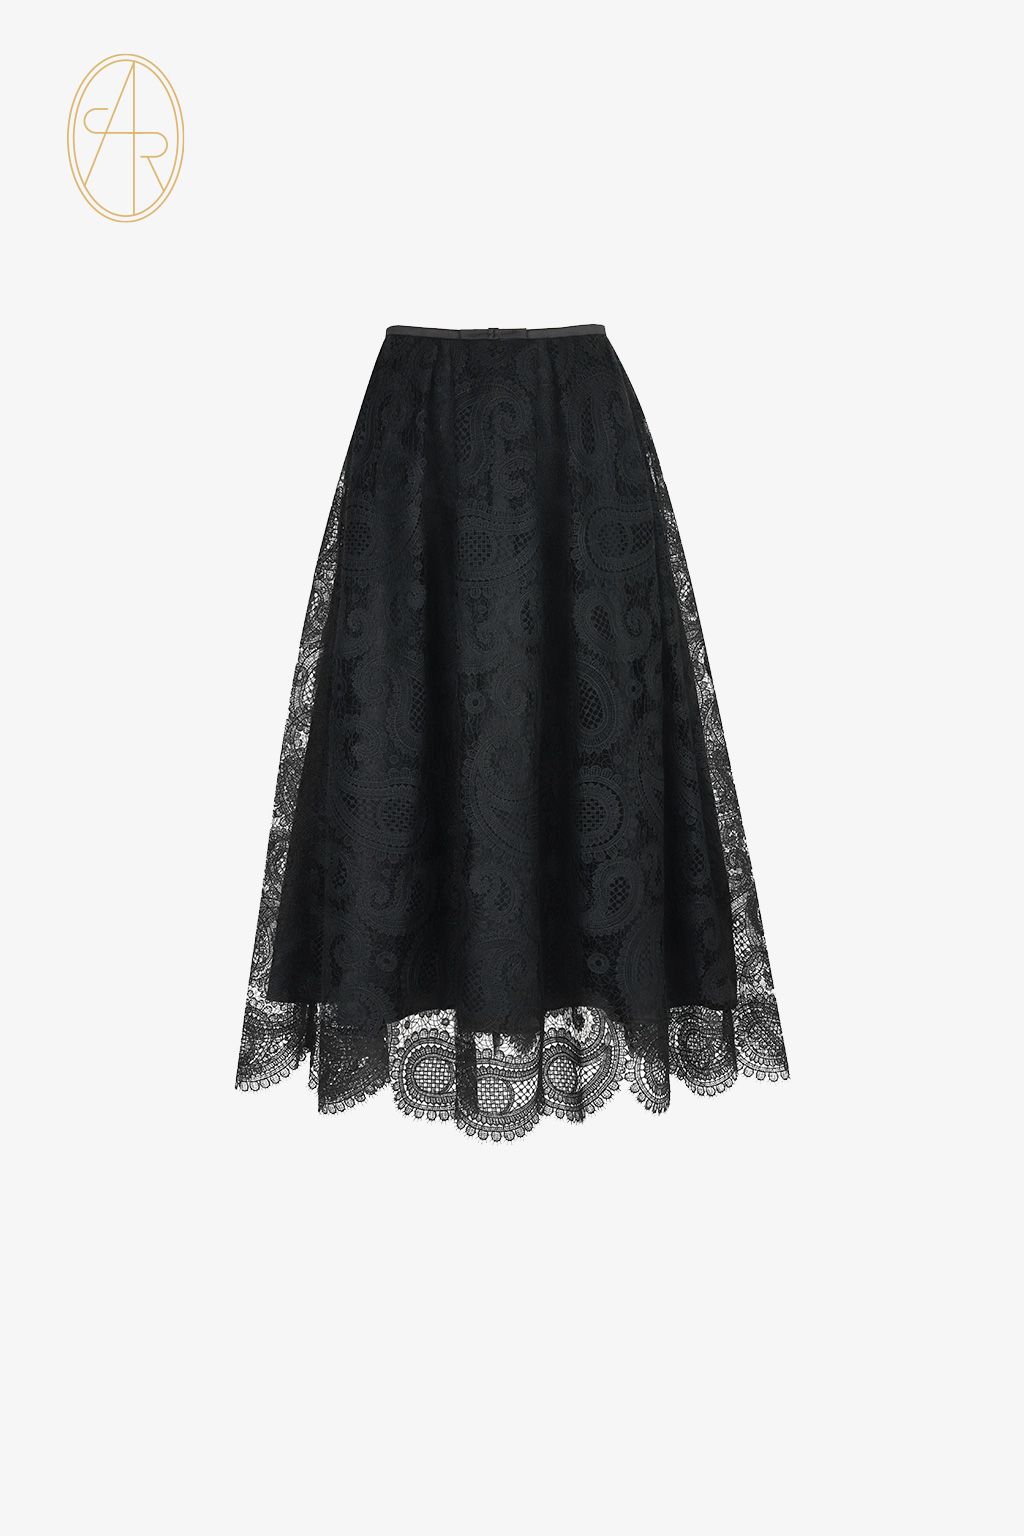 [exclusive] precious lace skirt